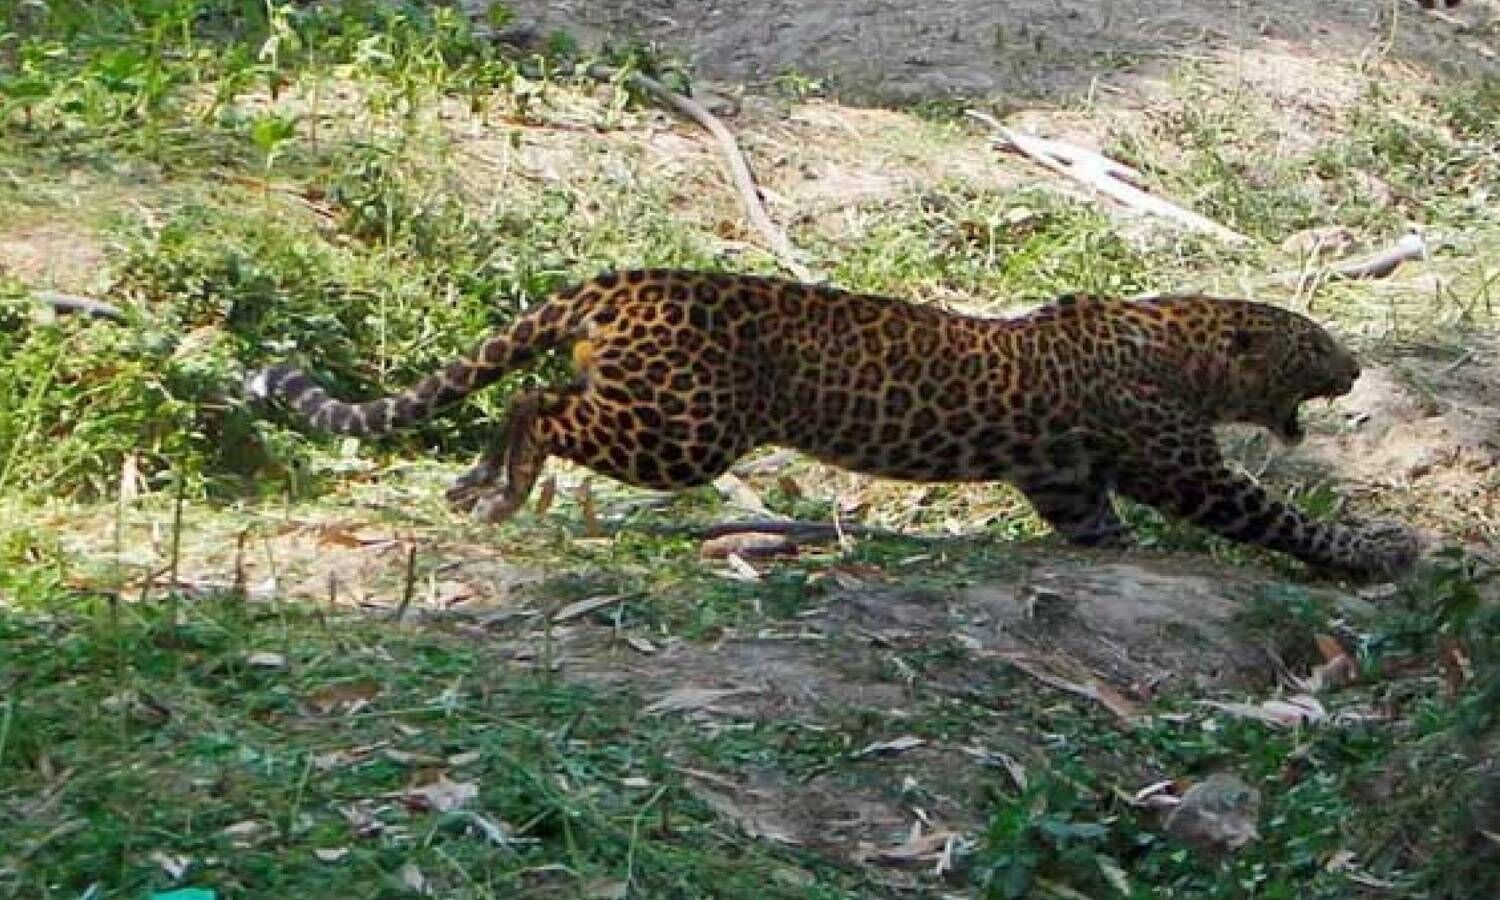 Two hurt in leopard attack at Tirumala; tigers spotted in Nallamala forest,  devotees alerted